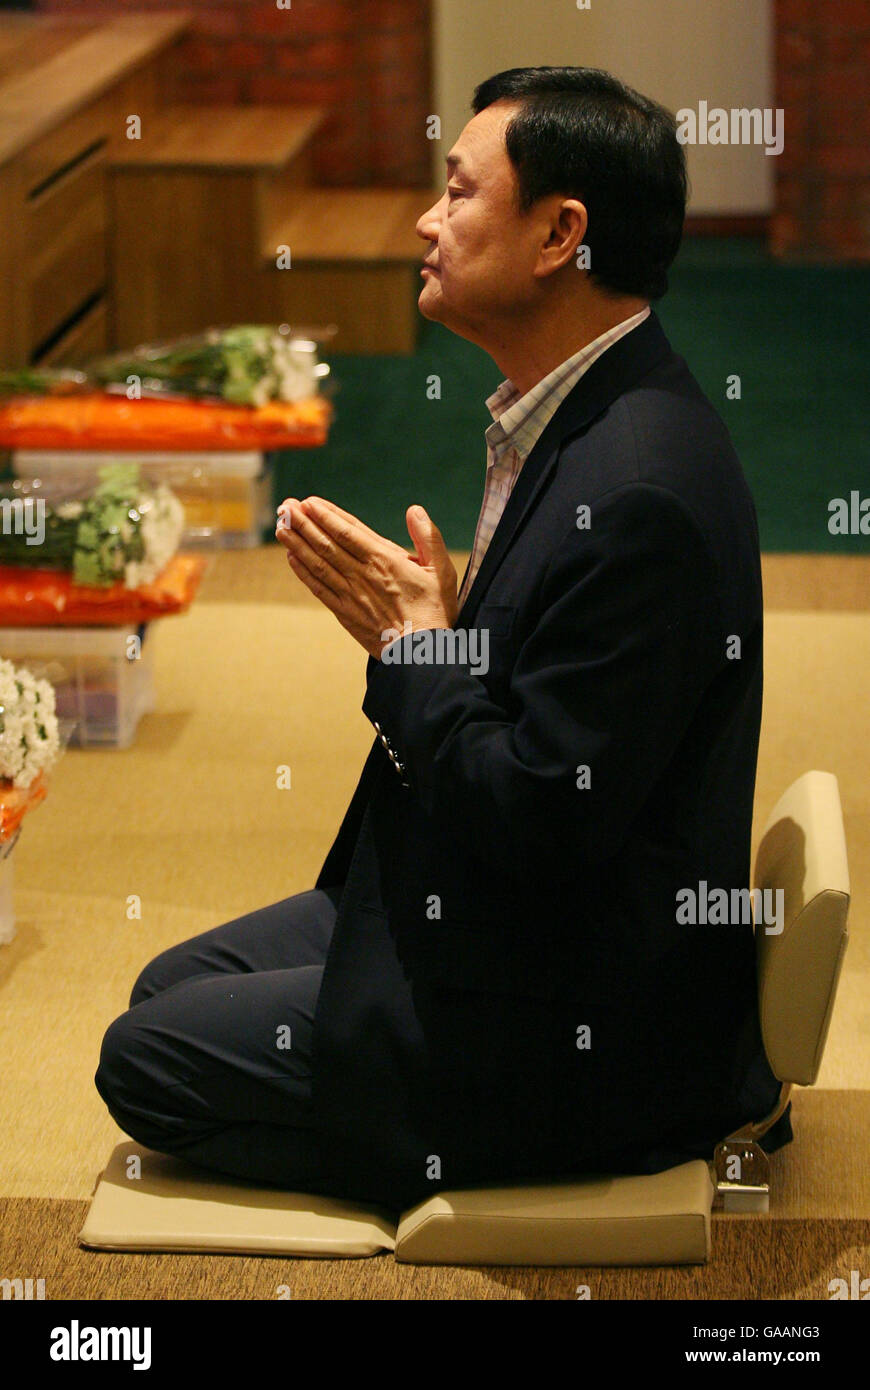 Dr. Thaksin Shinawatra, former Prime Minister of Thailand, during prayers at the Dhammakaya Centre for Buddist Meditation in Knaphill, Surrey, a year after being ousted from office. Stock Photo